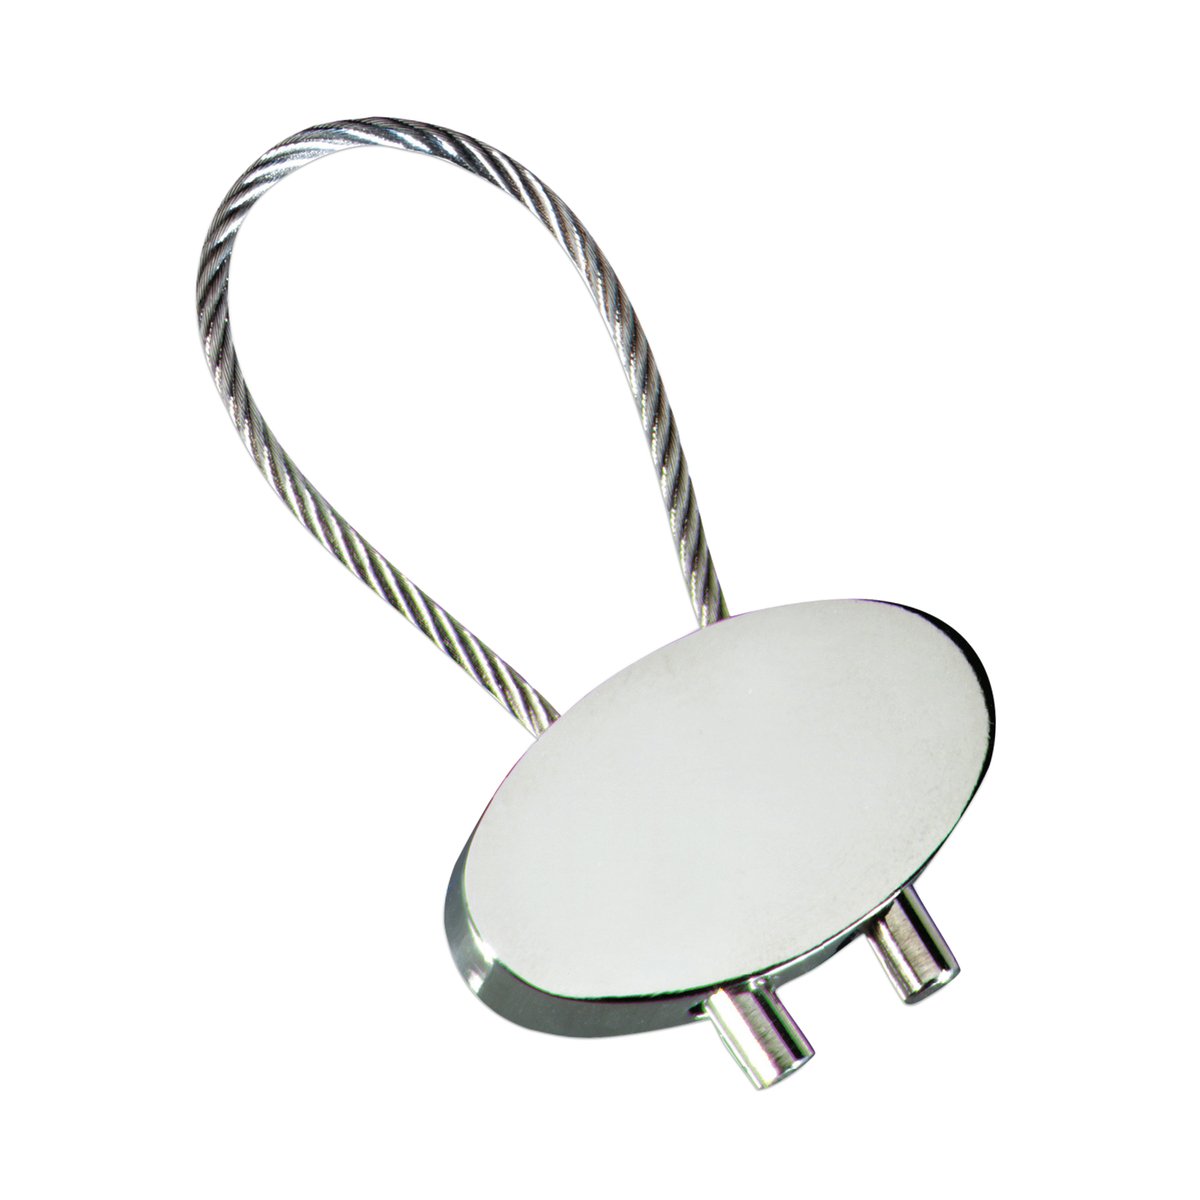 Key Ring RE98-CABLE silverpolished finish